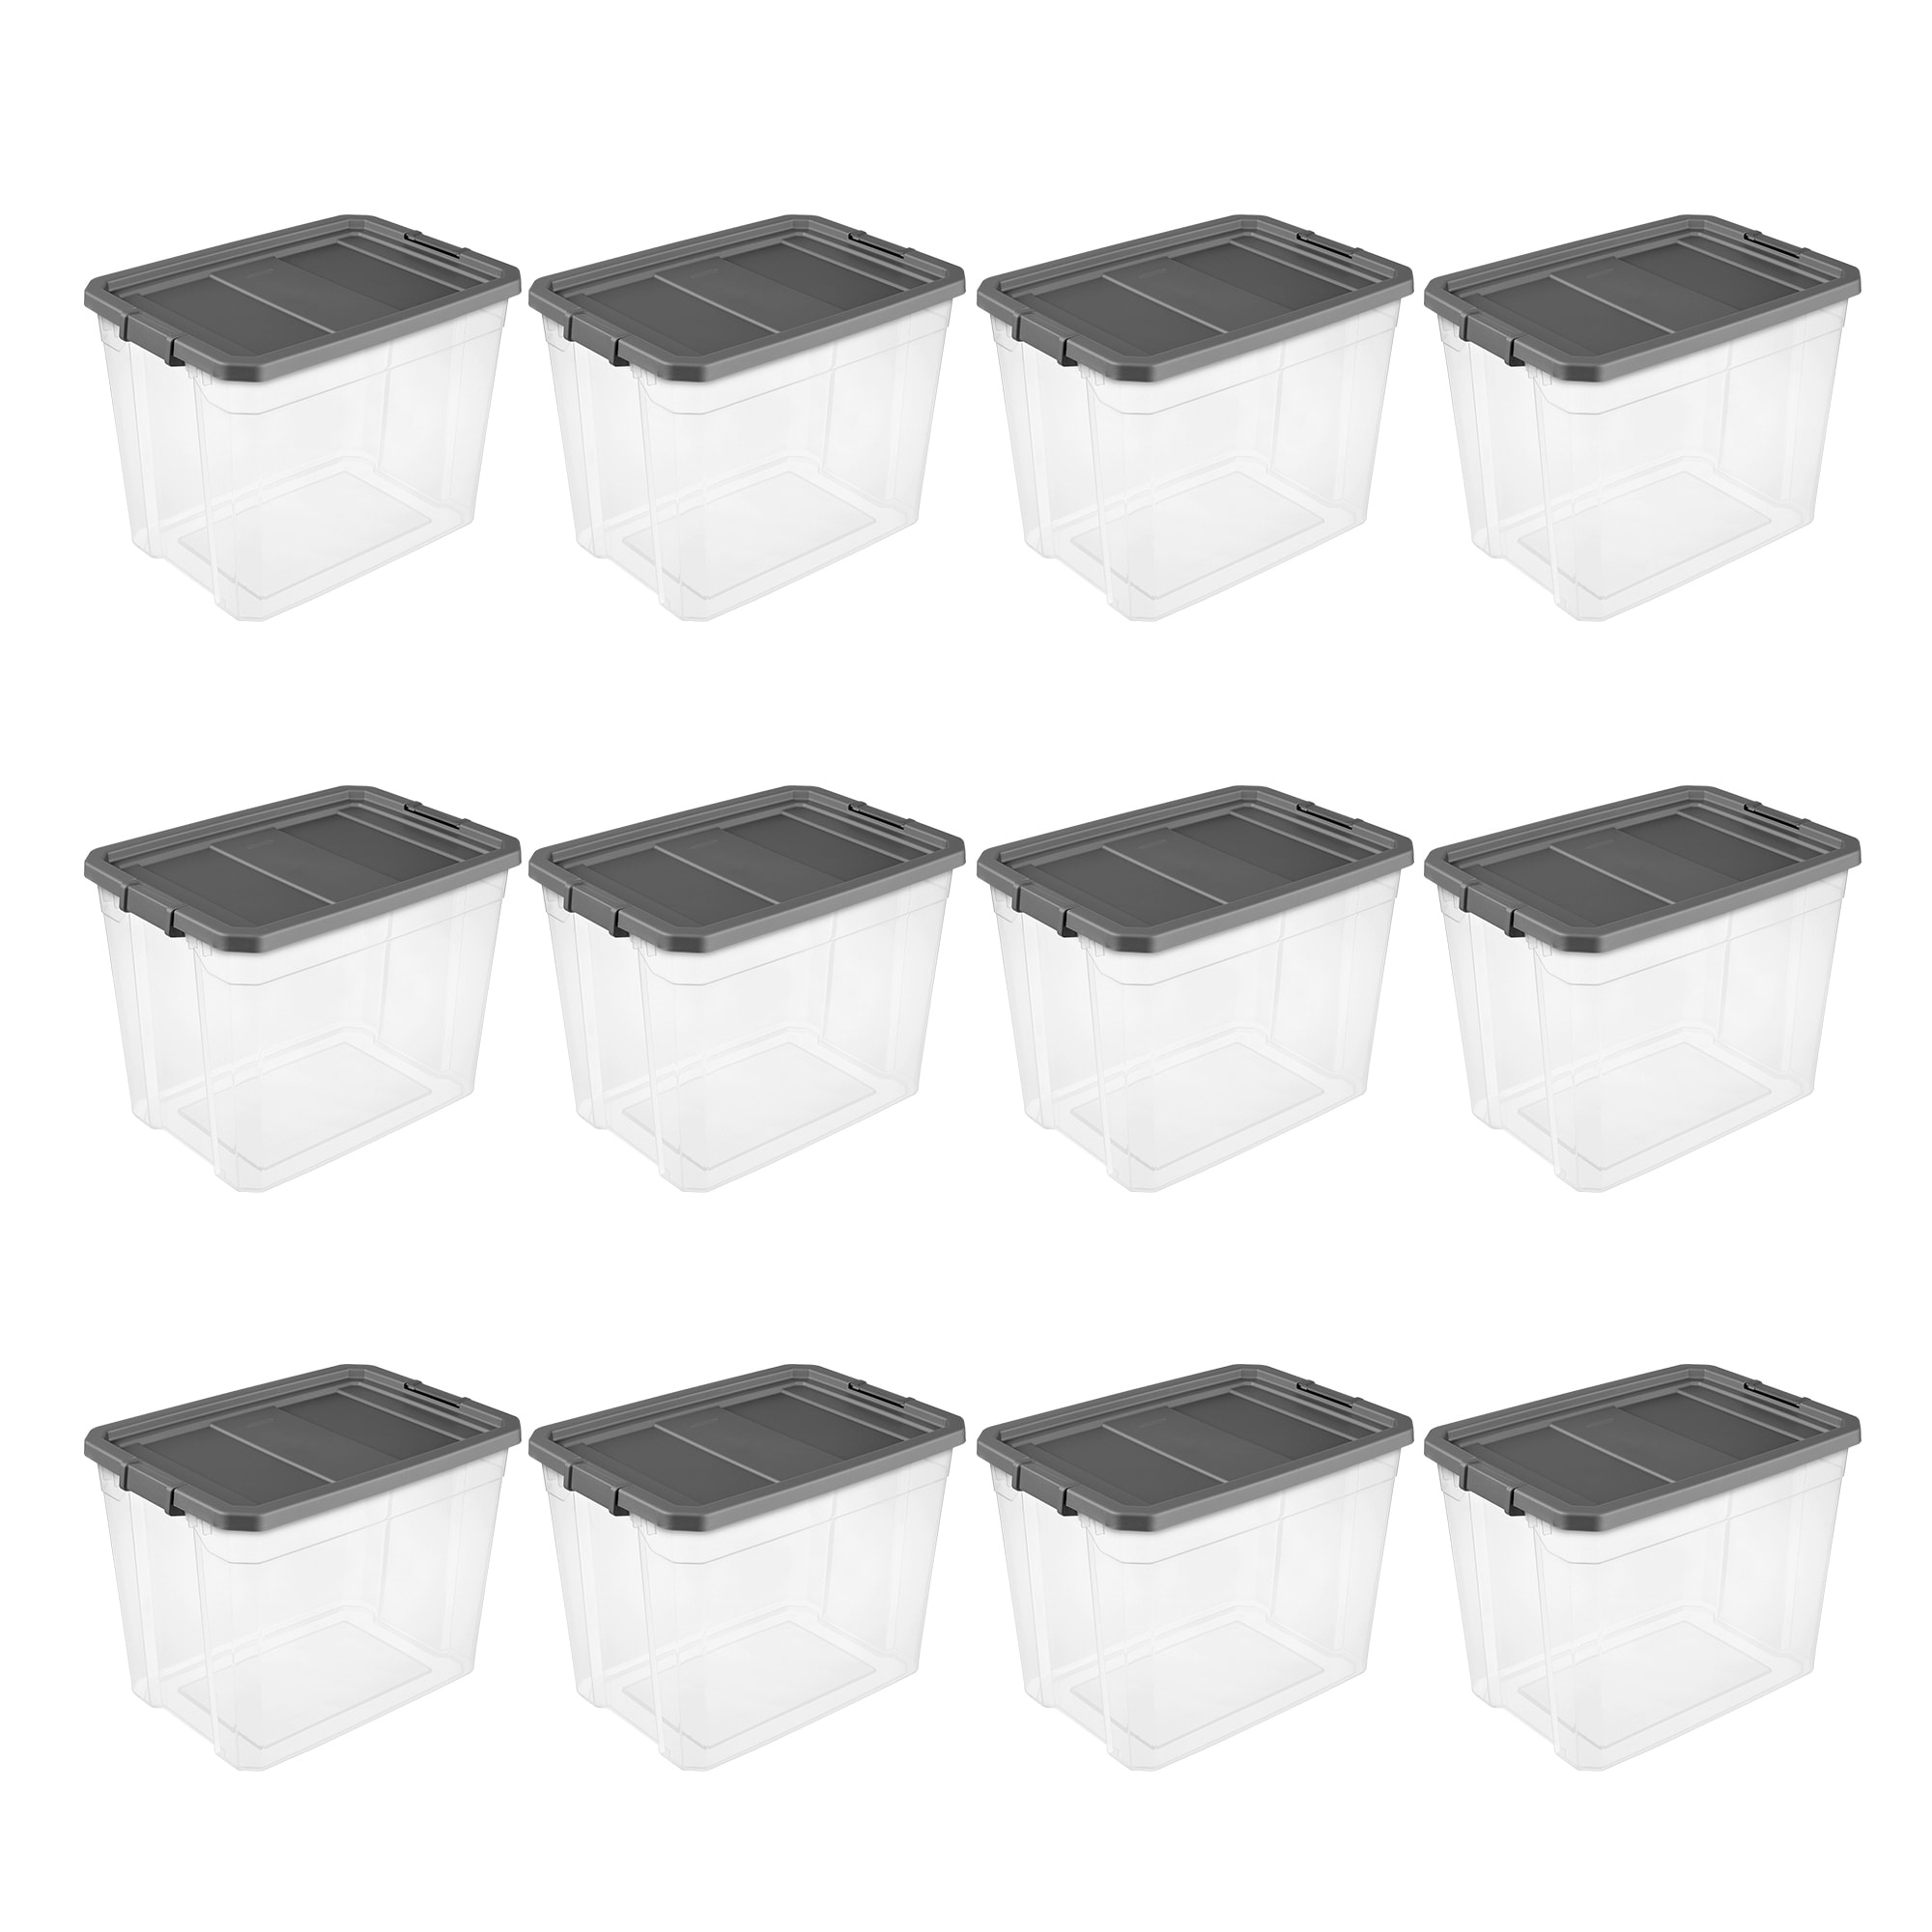 https://ak1.ostkcdn.com/images/products/is/images/direct/18689670d6dca272d2119deee38eb30d84cc8343/Sterilite-108-Qt-Clear-Stacker-Storage-Container-Tote-w--Latching-Lid%2C-12-Pack.jpg